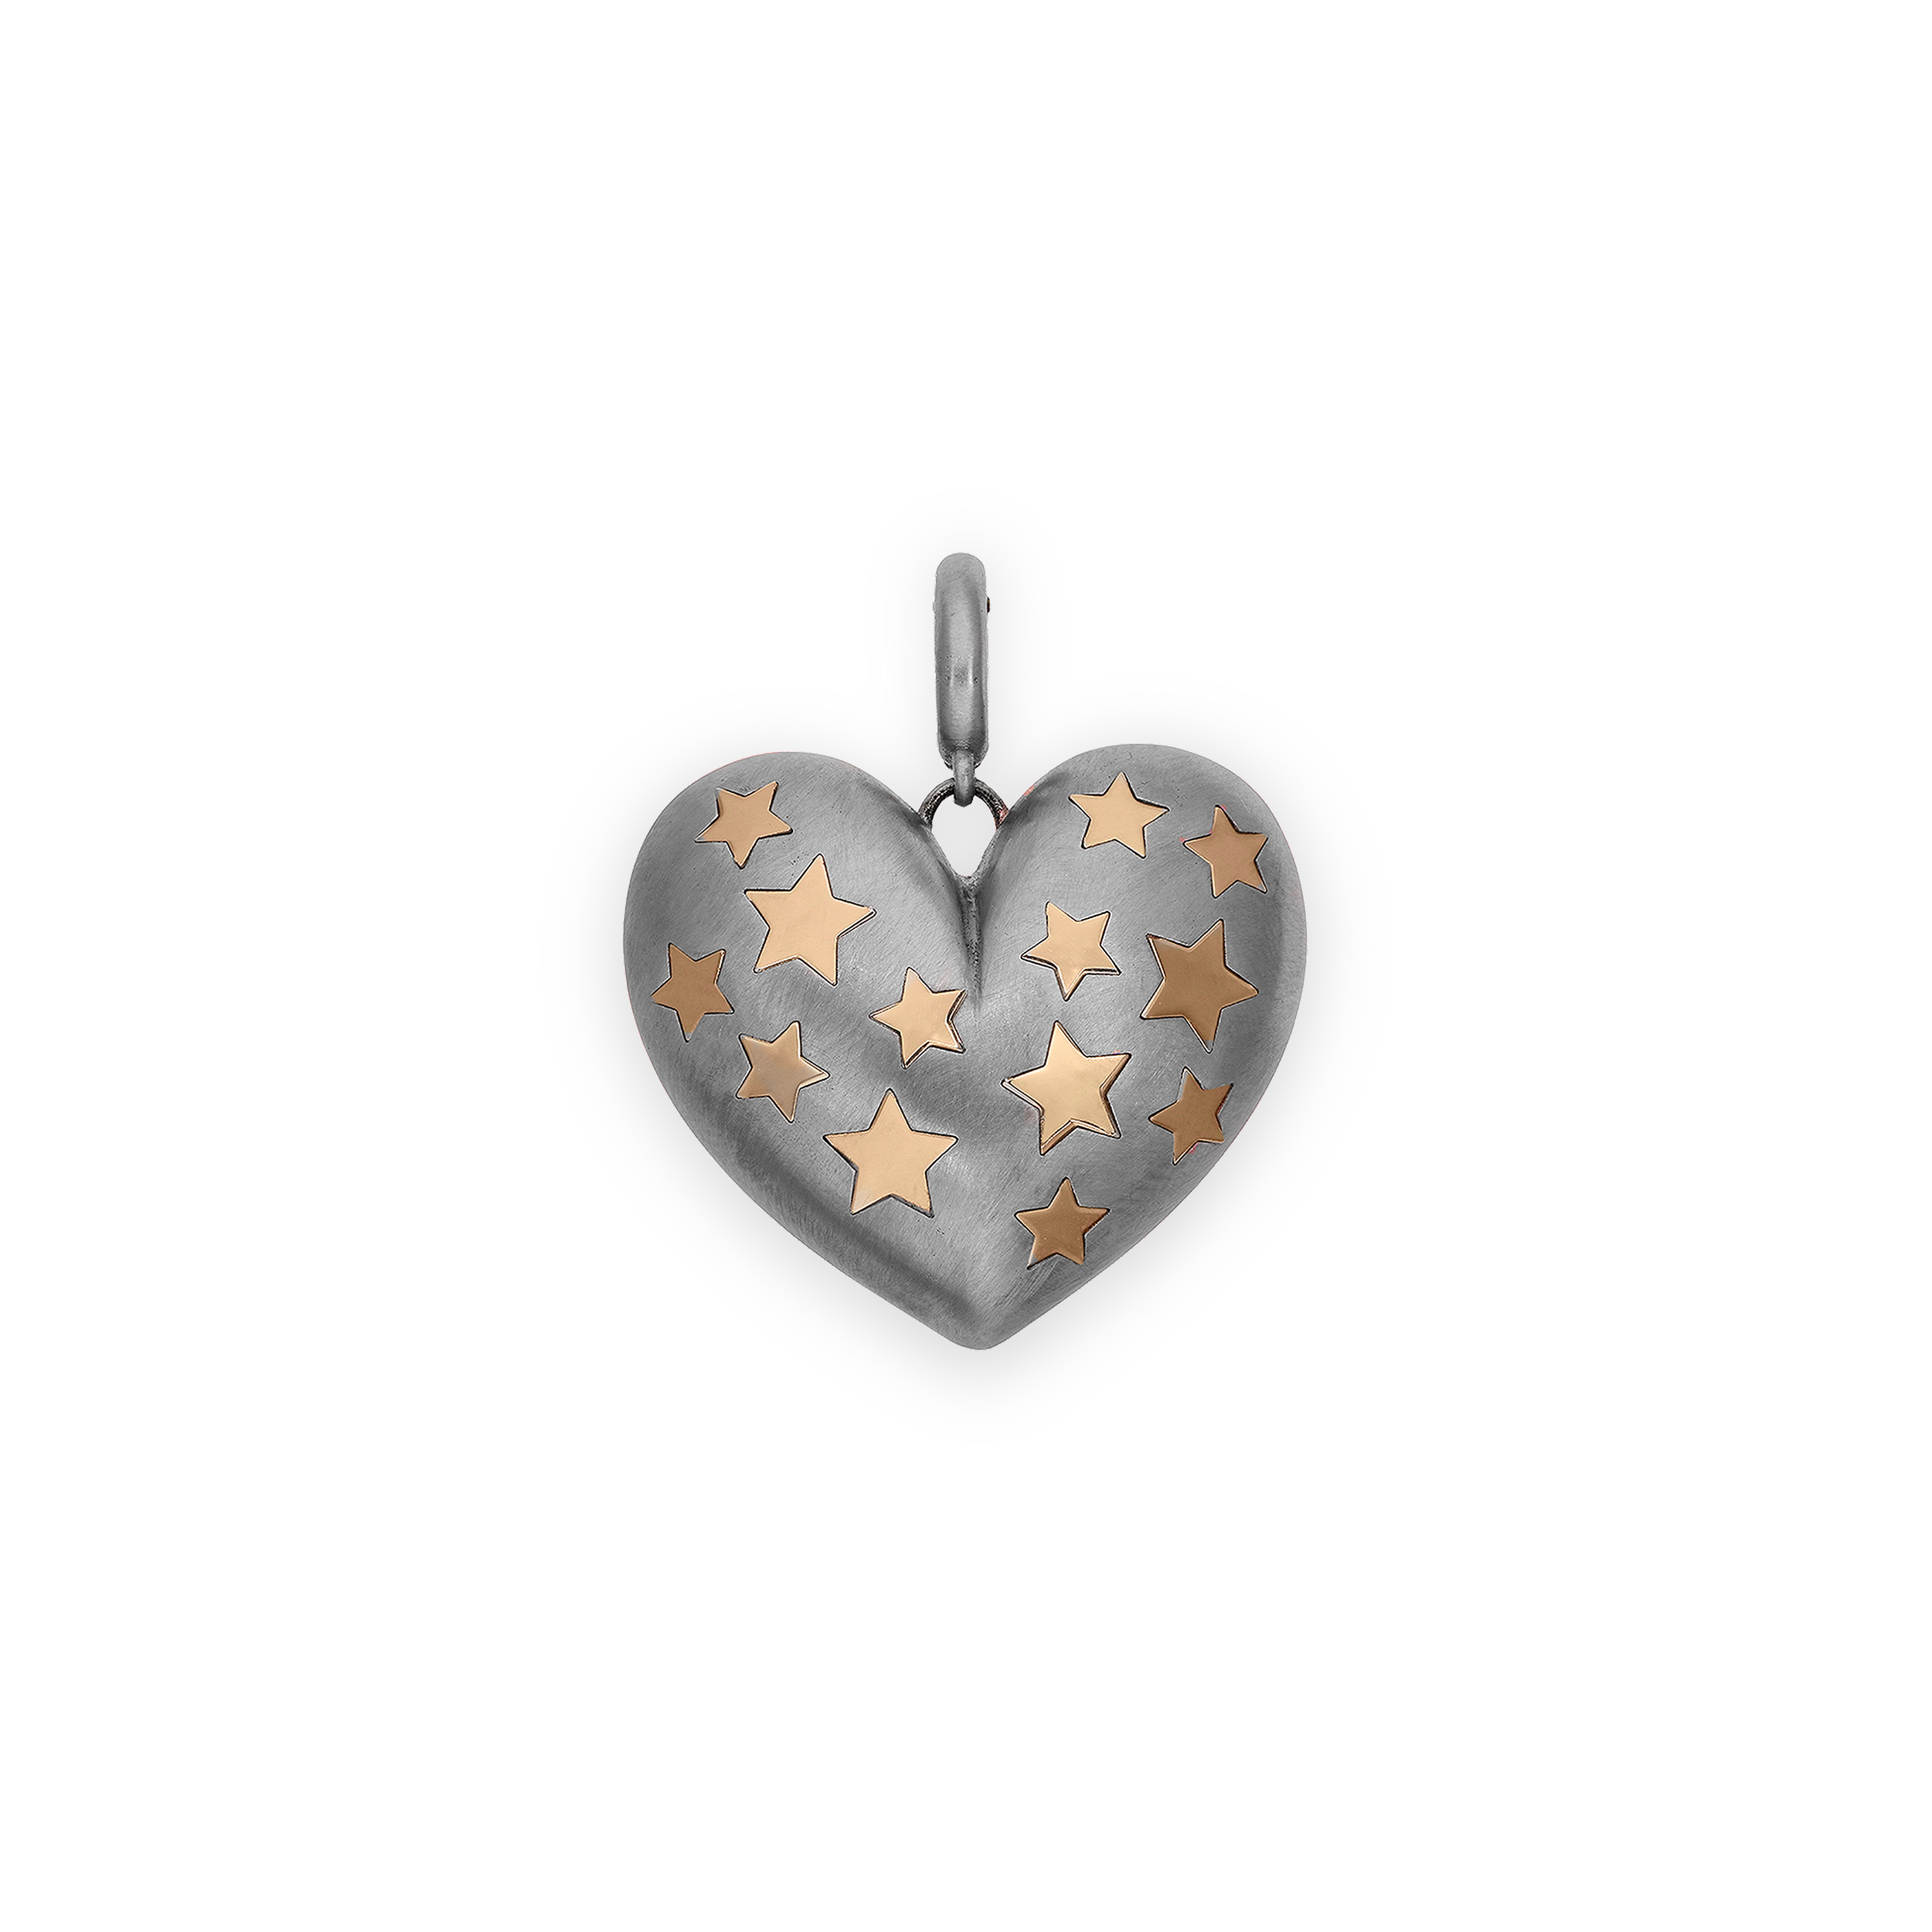 Paulette Brushed White Gold Heart with Yellow Gold Stars Pendant